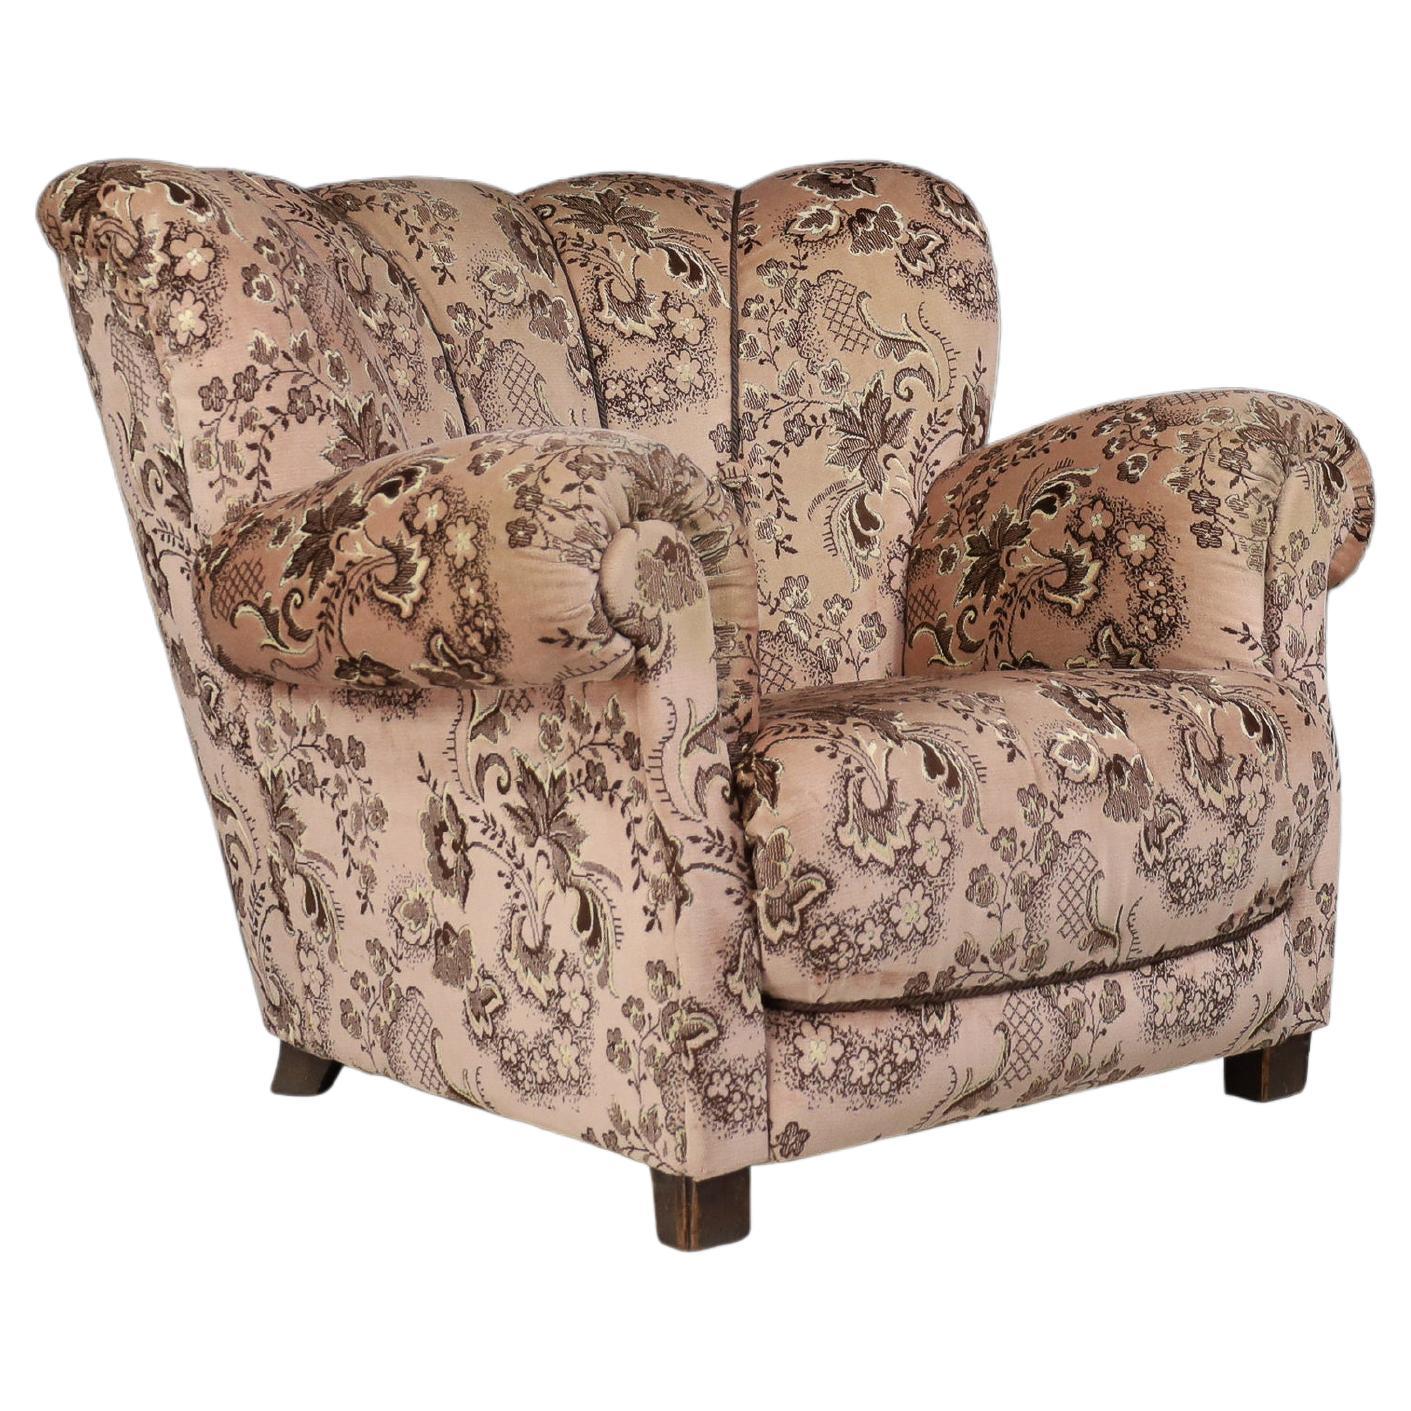 Art Deco Lounge Chair in Floral Fabric Prague, 1930s For Sale